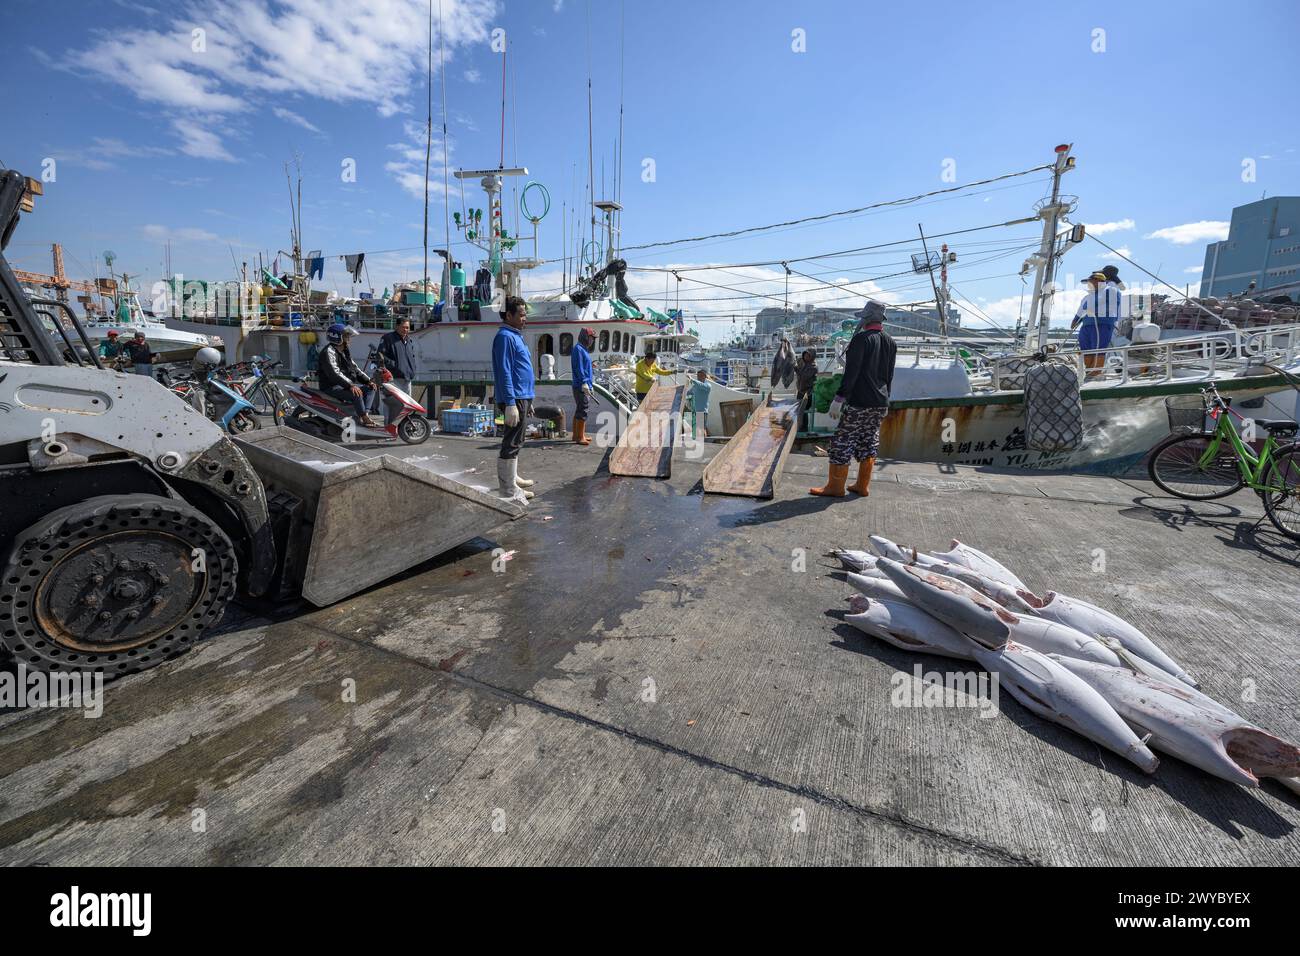 Fishermen in a port downloading frozen fish from a boat  on a sunny day with fishing boats in the background Stock Photo